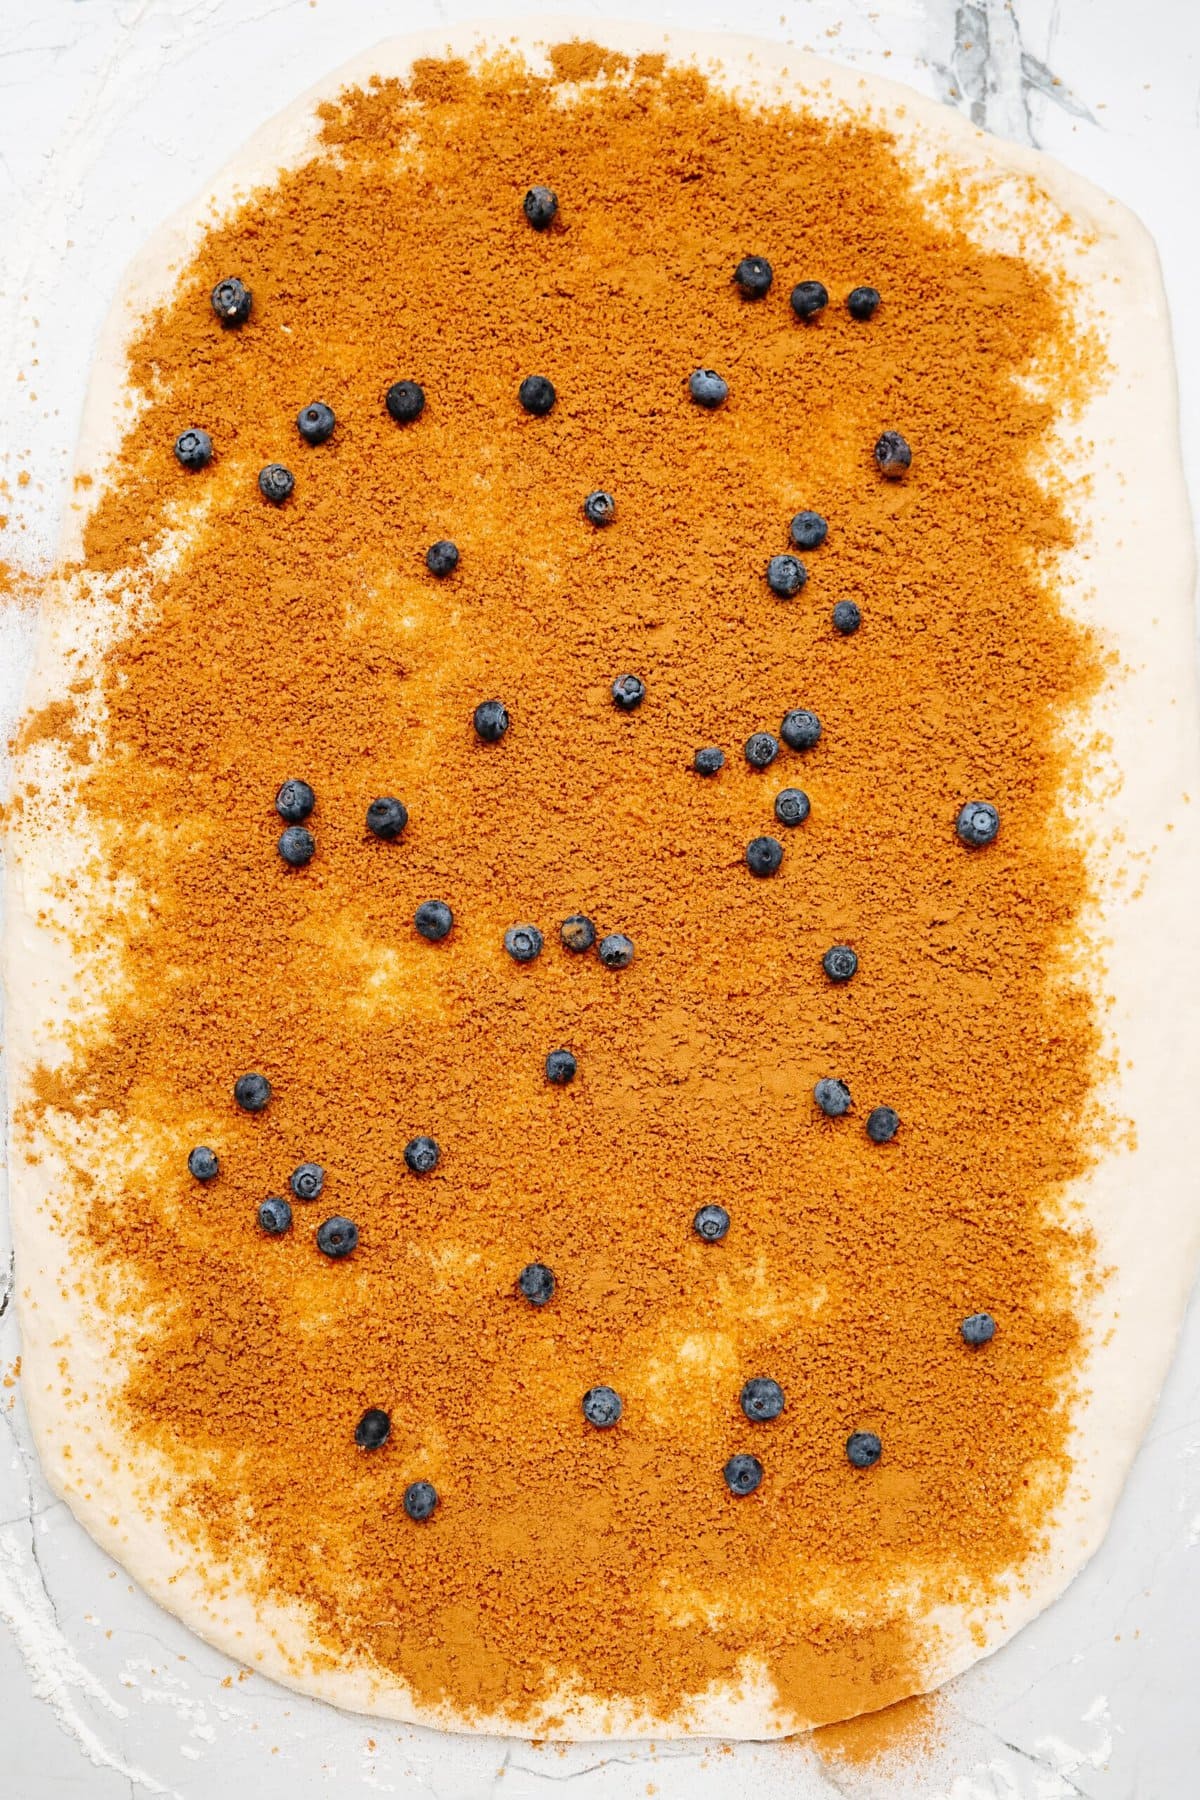 A rolled-out dough sheet topped with a generous layer of cinnamon and scattered blueberries, reminiscent of the comforting flavors found in cinnamon rolls.